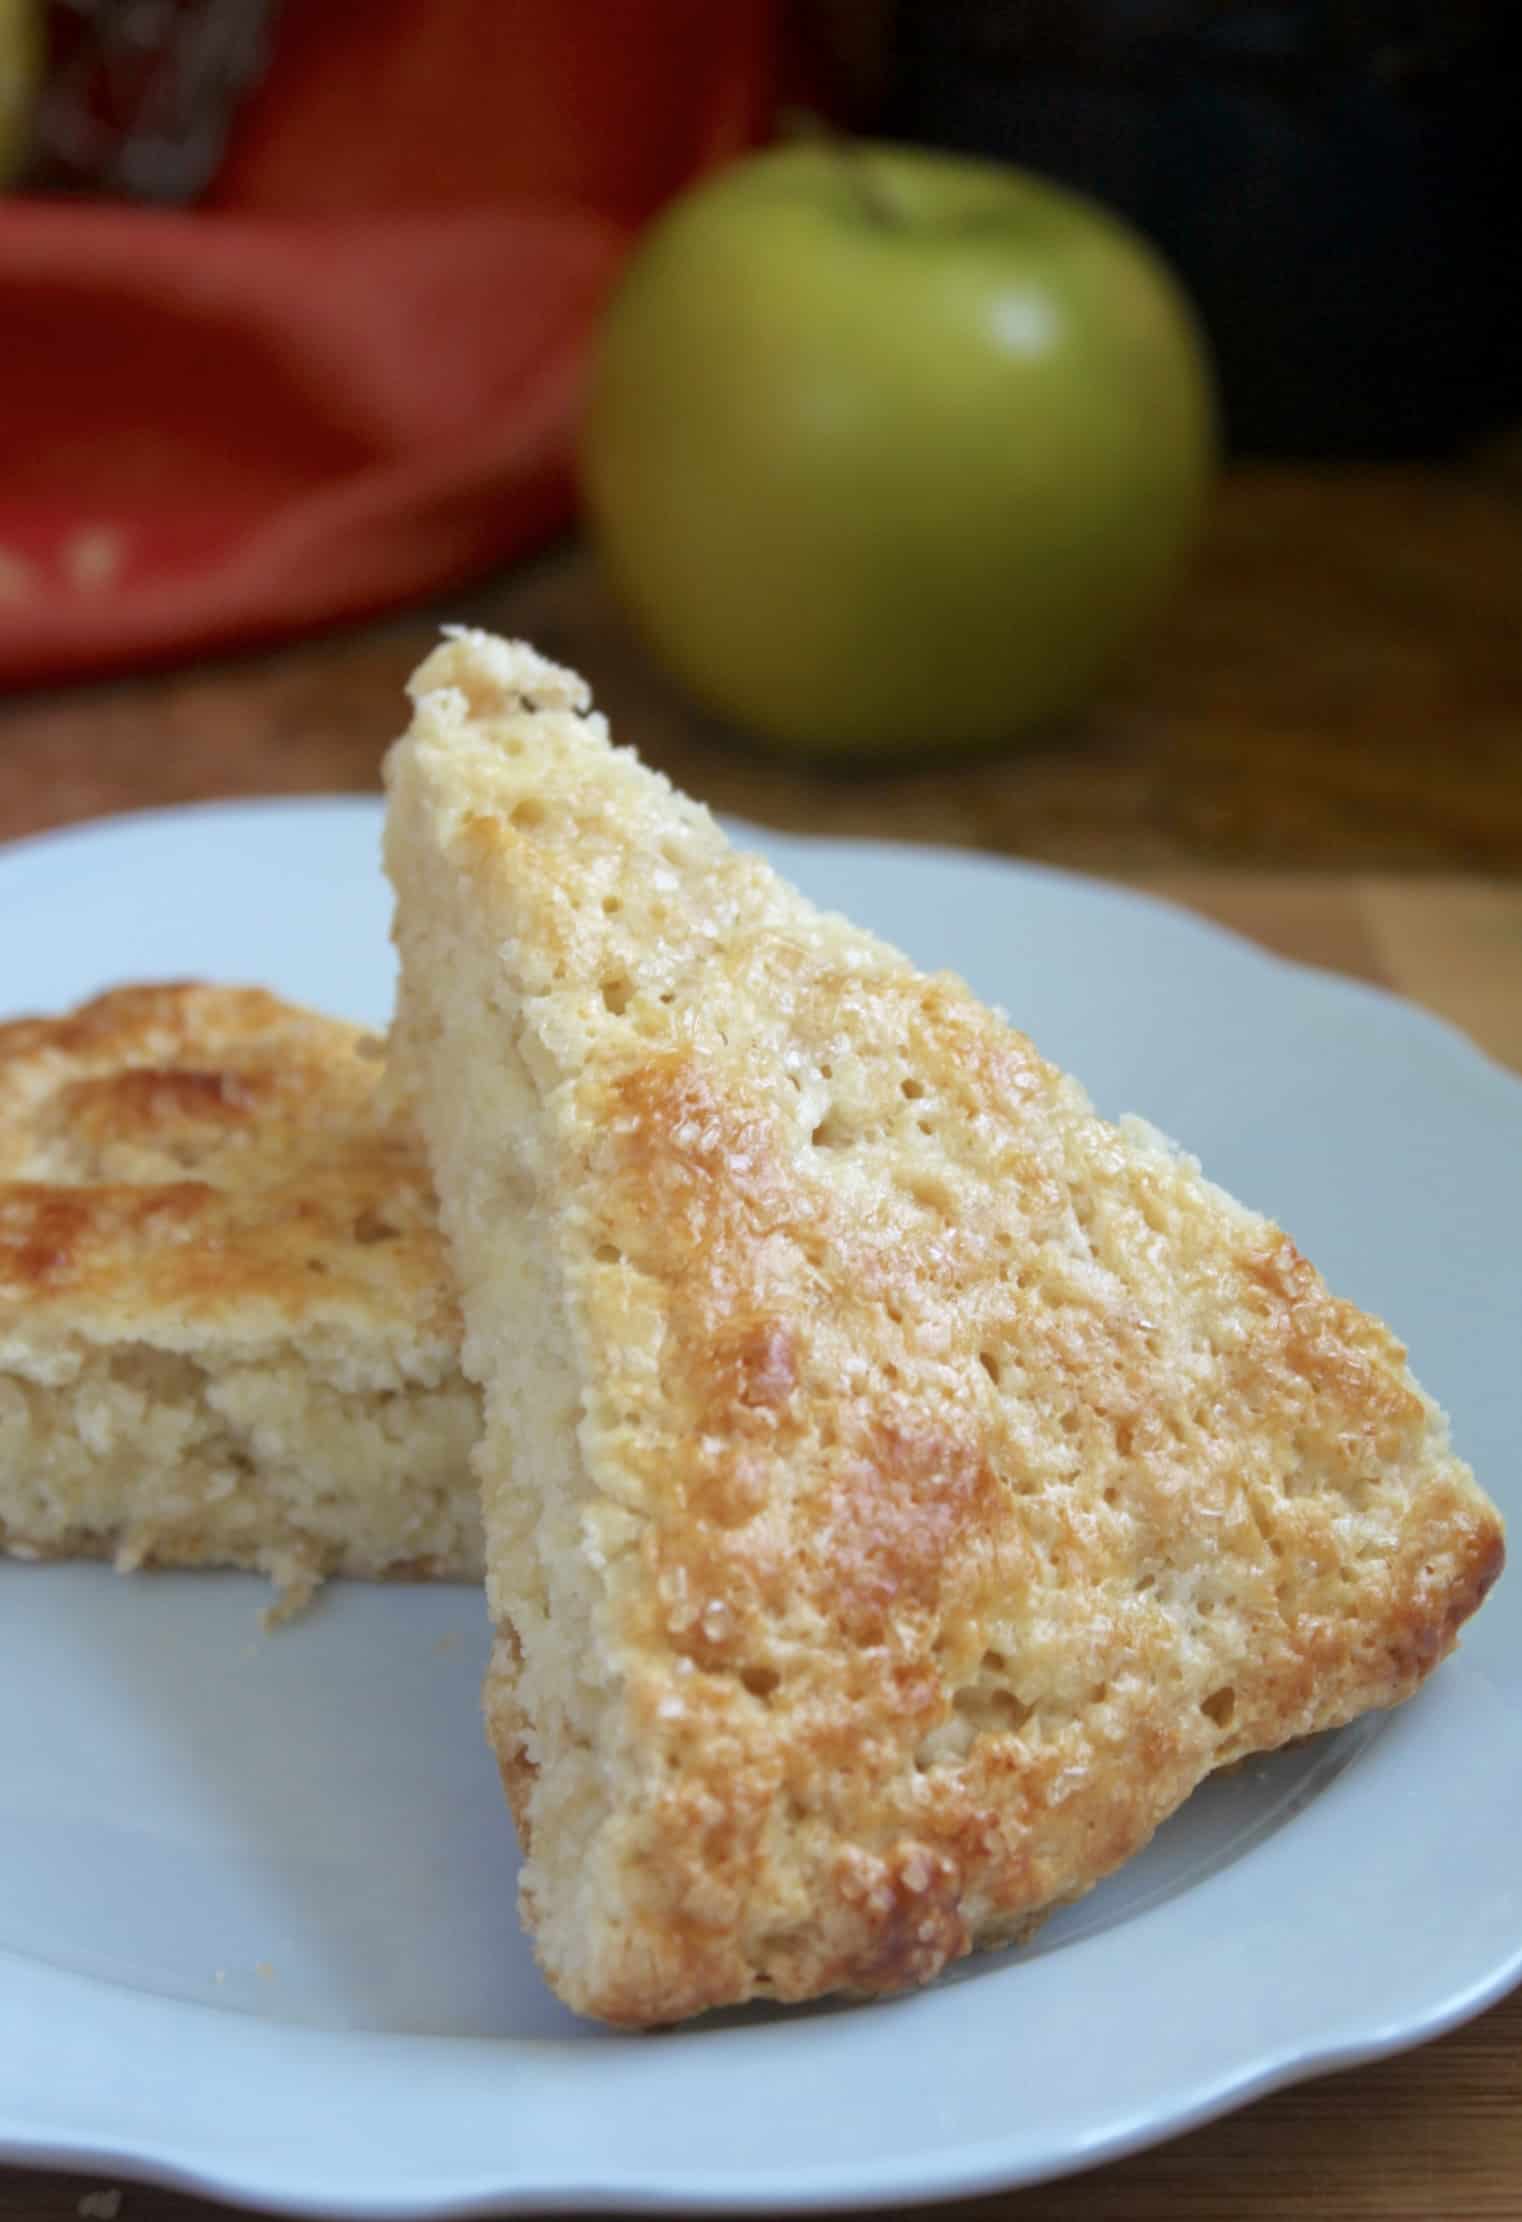 two apple scones on a blue plate